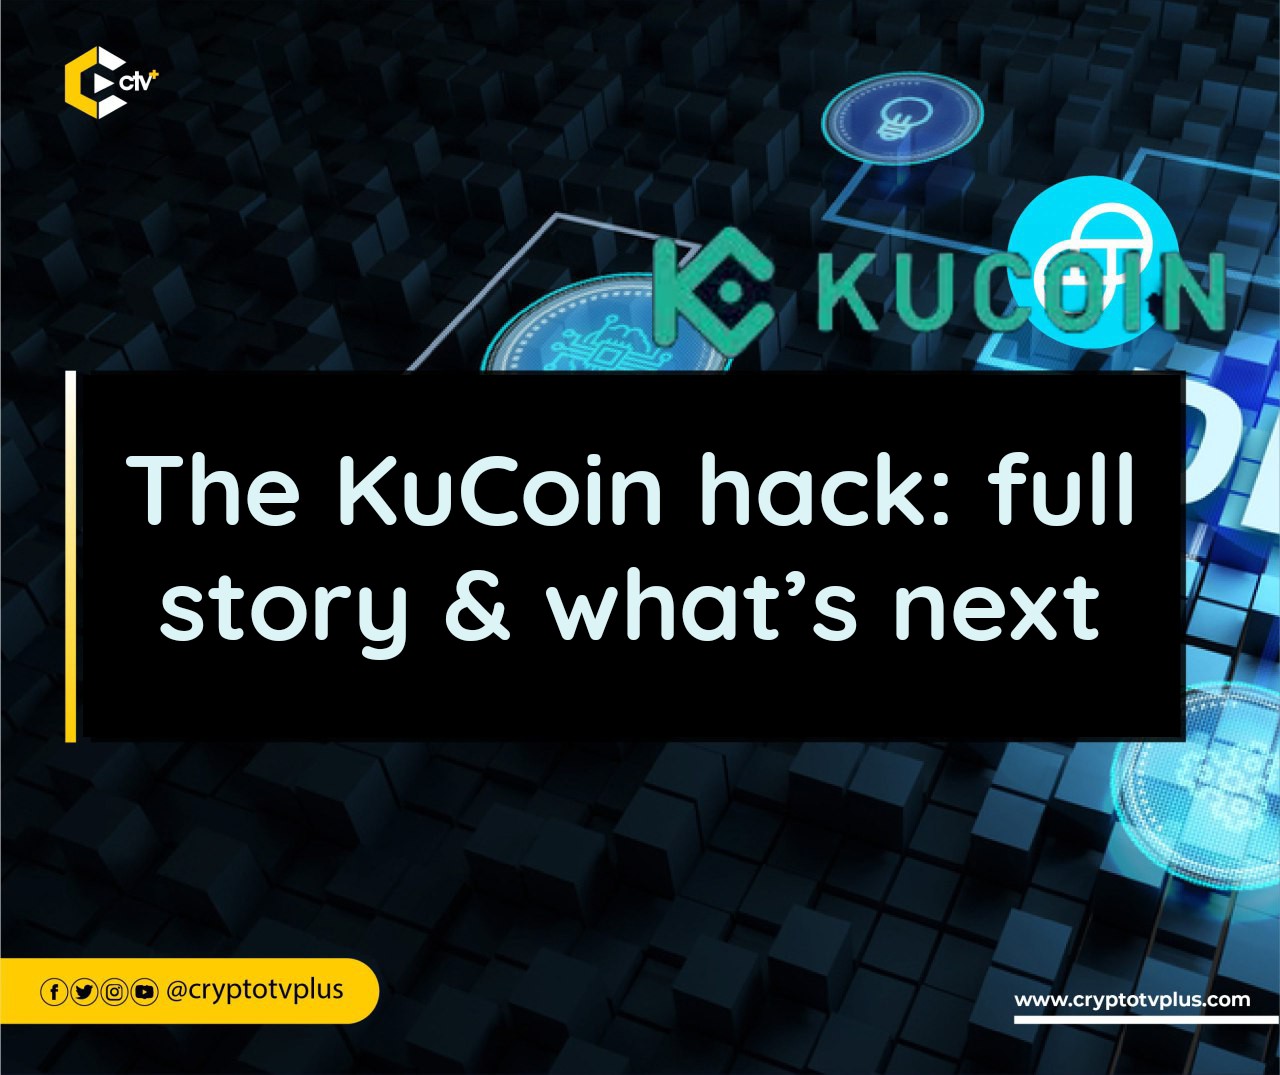 KuCoin's Twitter account hacked to promote crypto scam